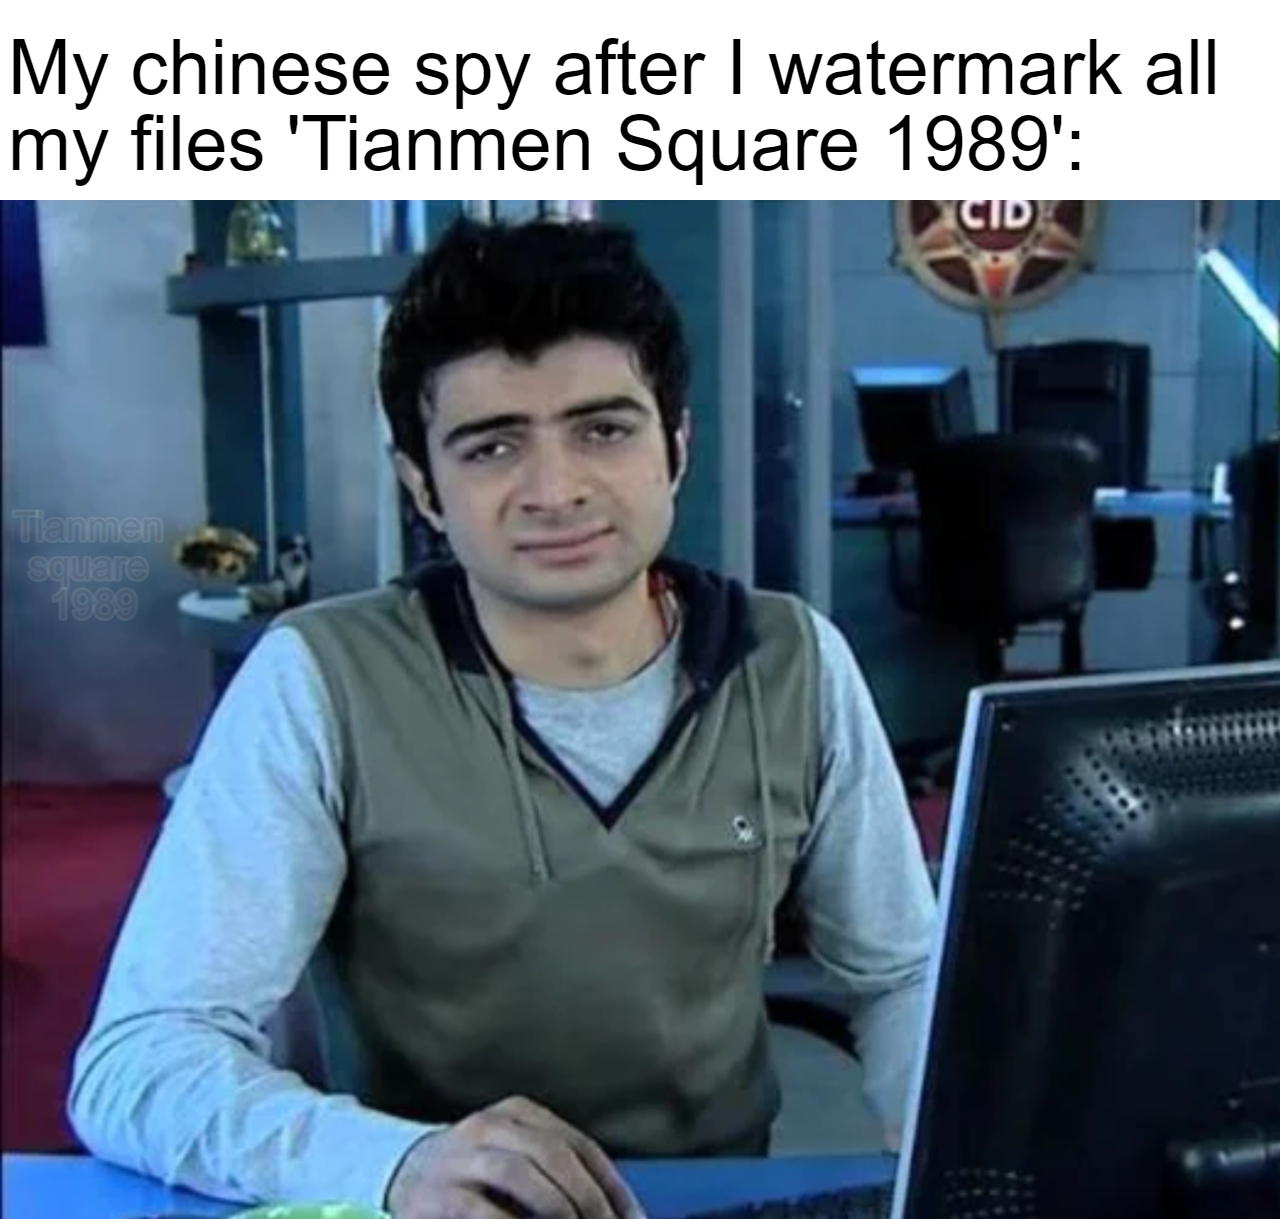 funny memes - dank memes - mr bean lite meme - My chinese spy after I watermark all my files 'Tianmen Square 1989' Cid 3